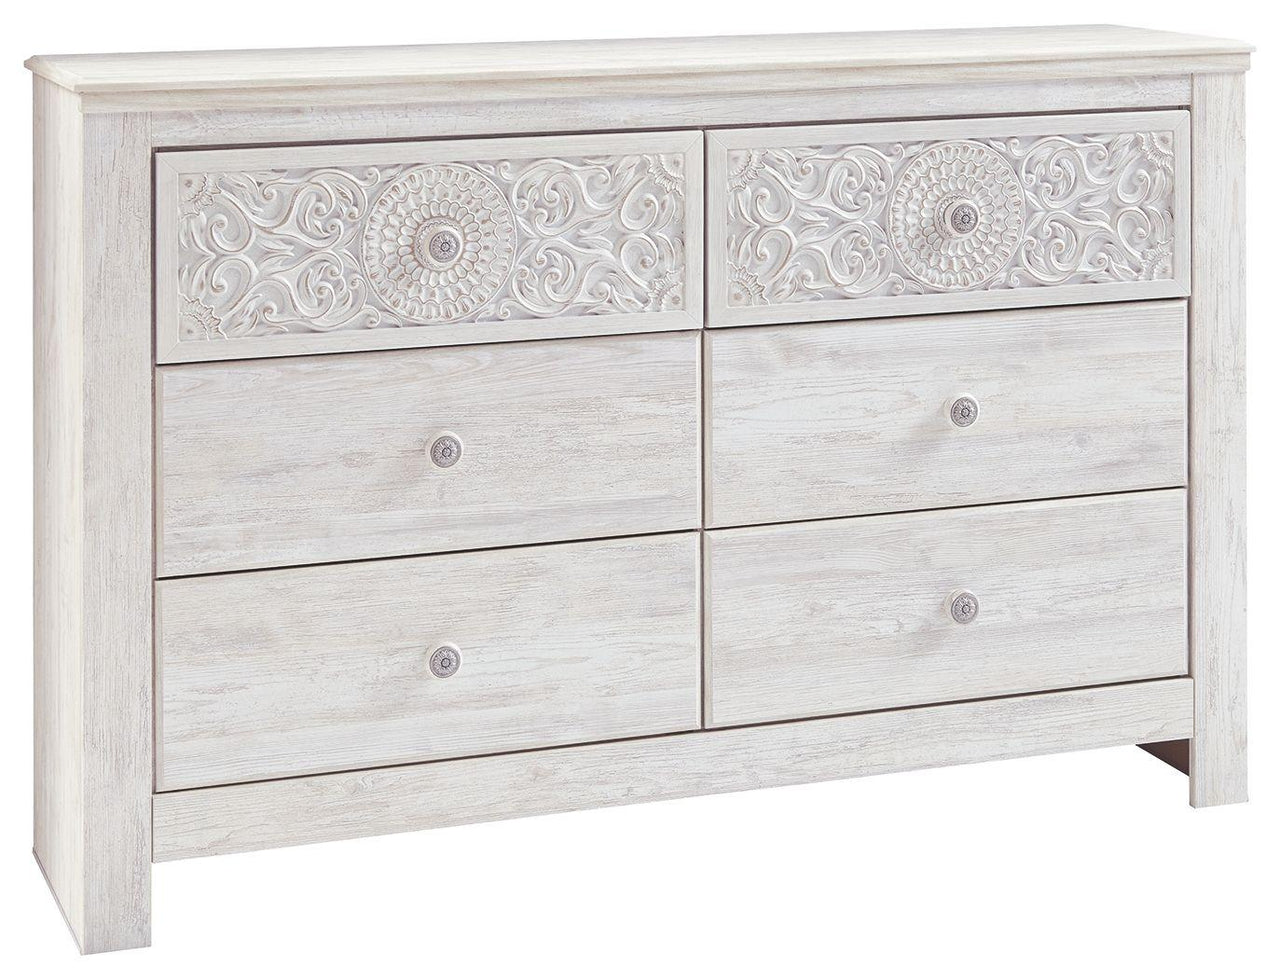 Paxberry - Whitewash - Six Drawer Dresser - Medallion Drawer Pulls Tony's Home Furnishings Furniture. Beds. Dressers. Sofas.